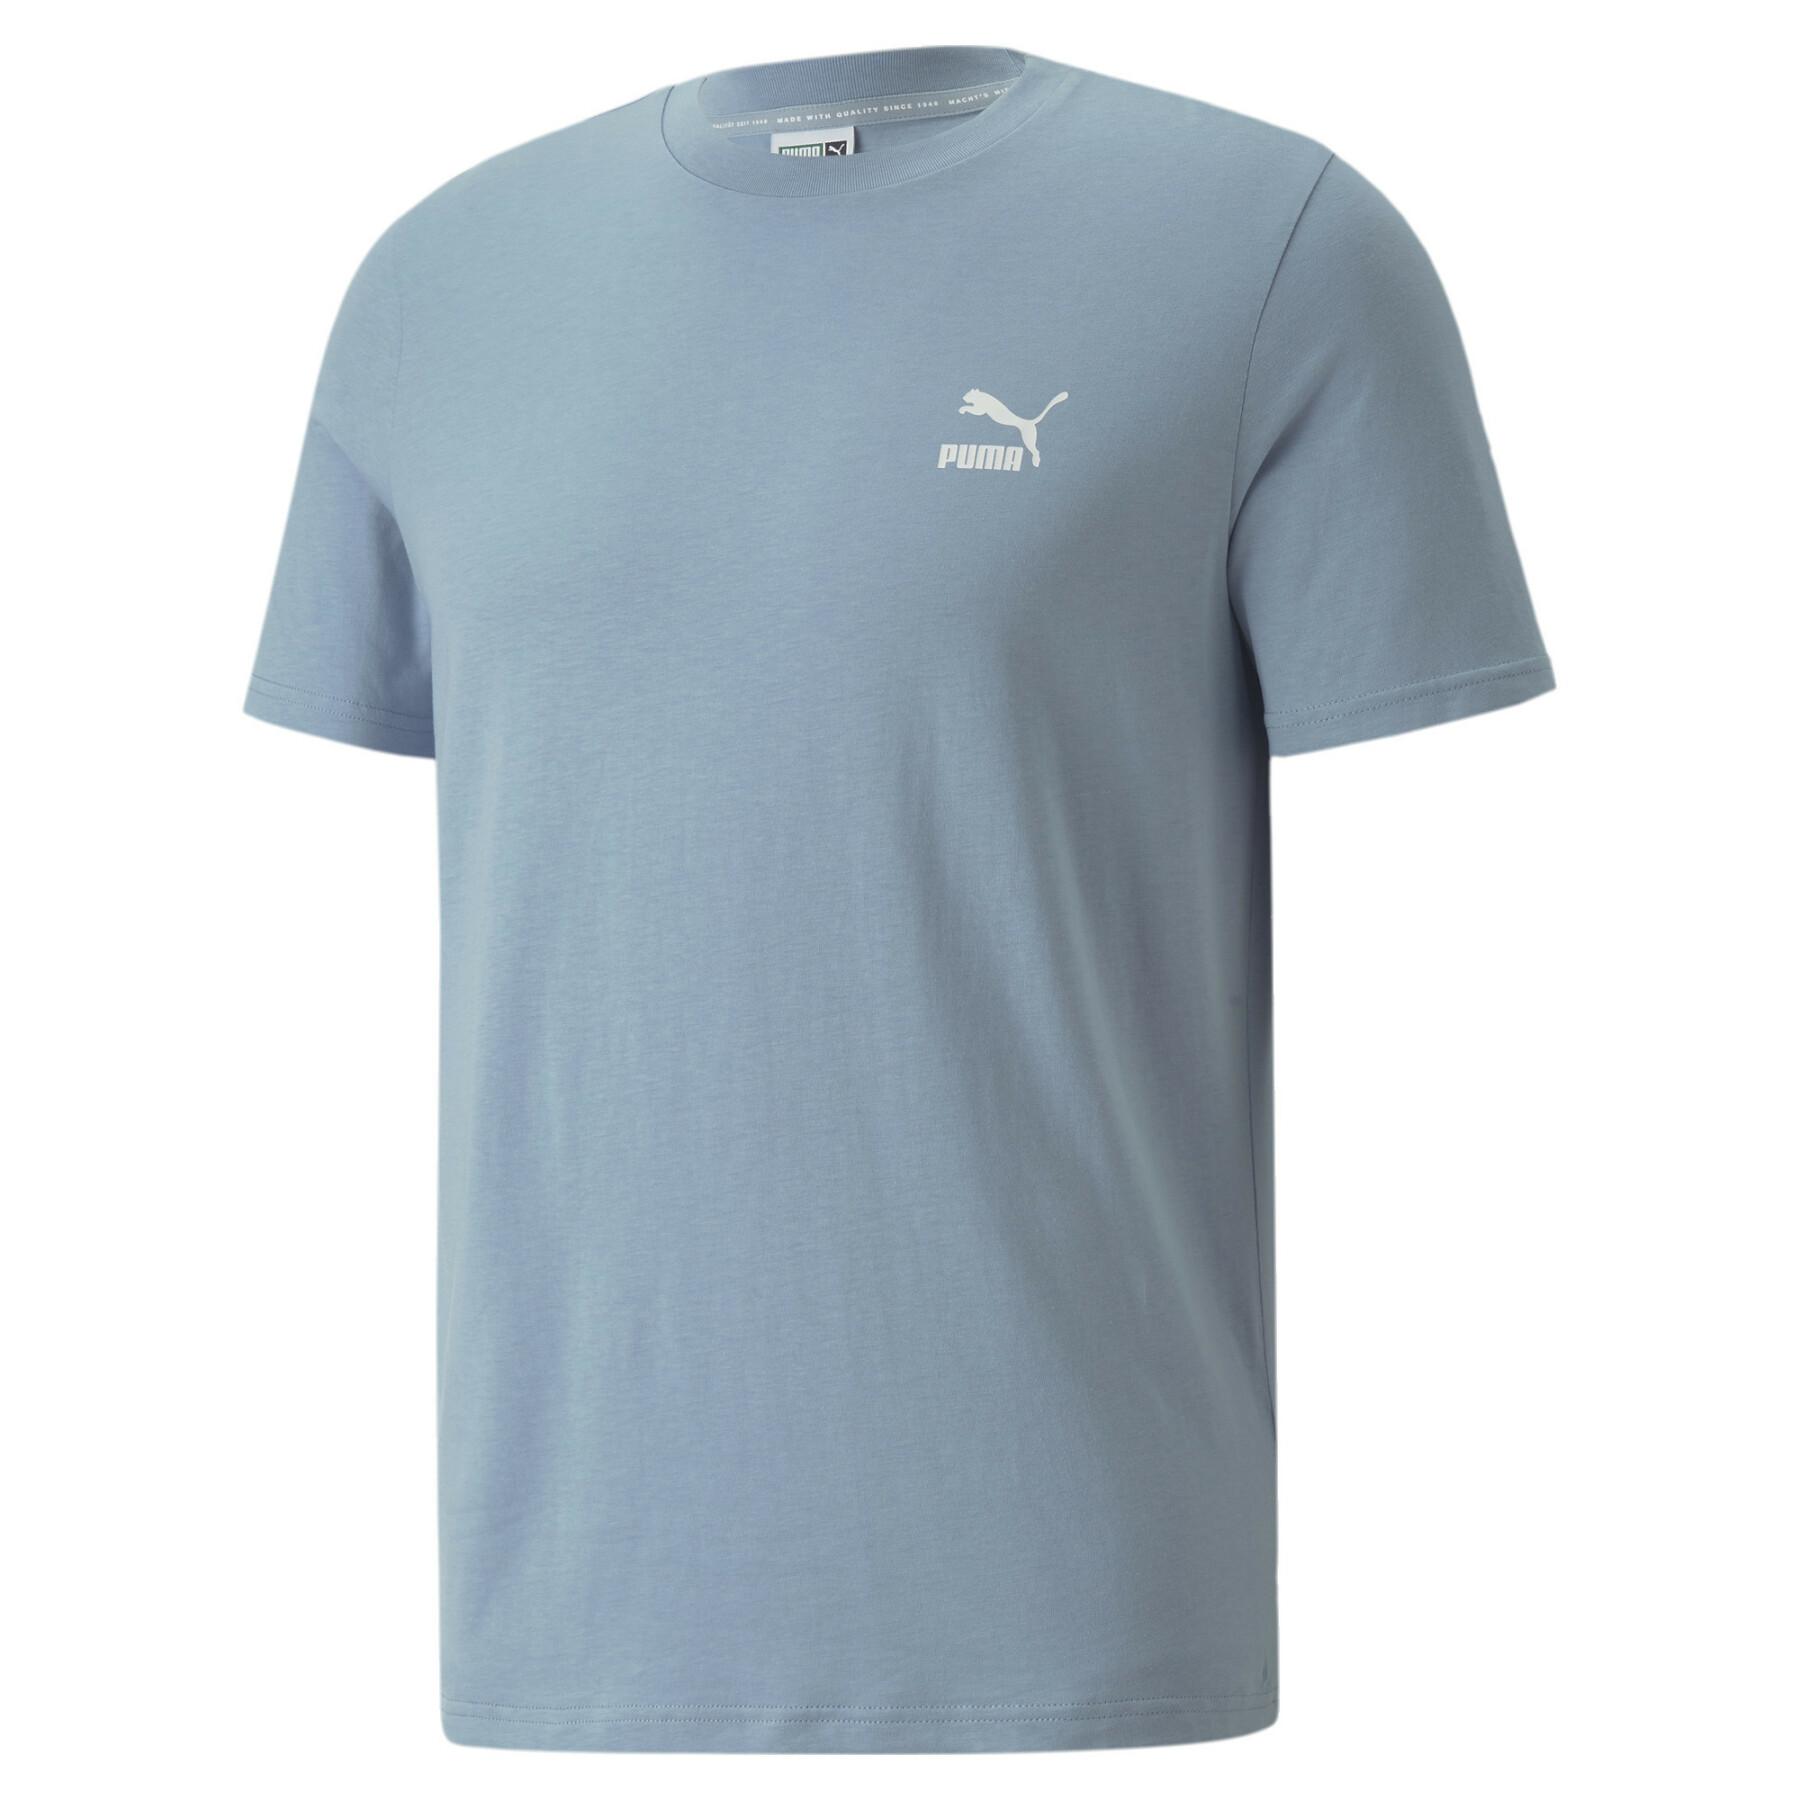 Classic T-shirt with small logo Puma